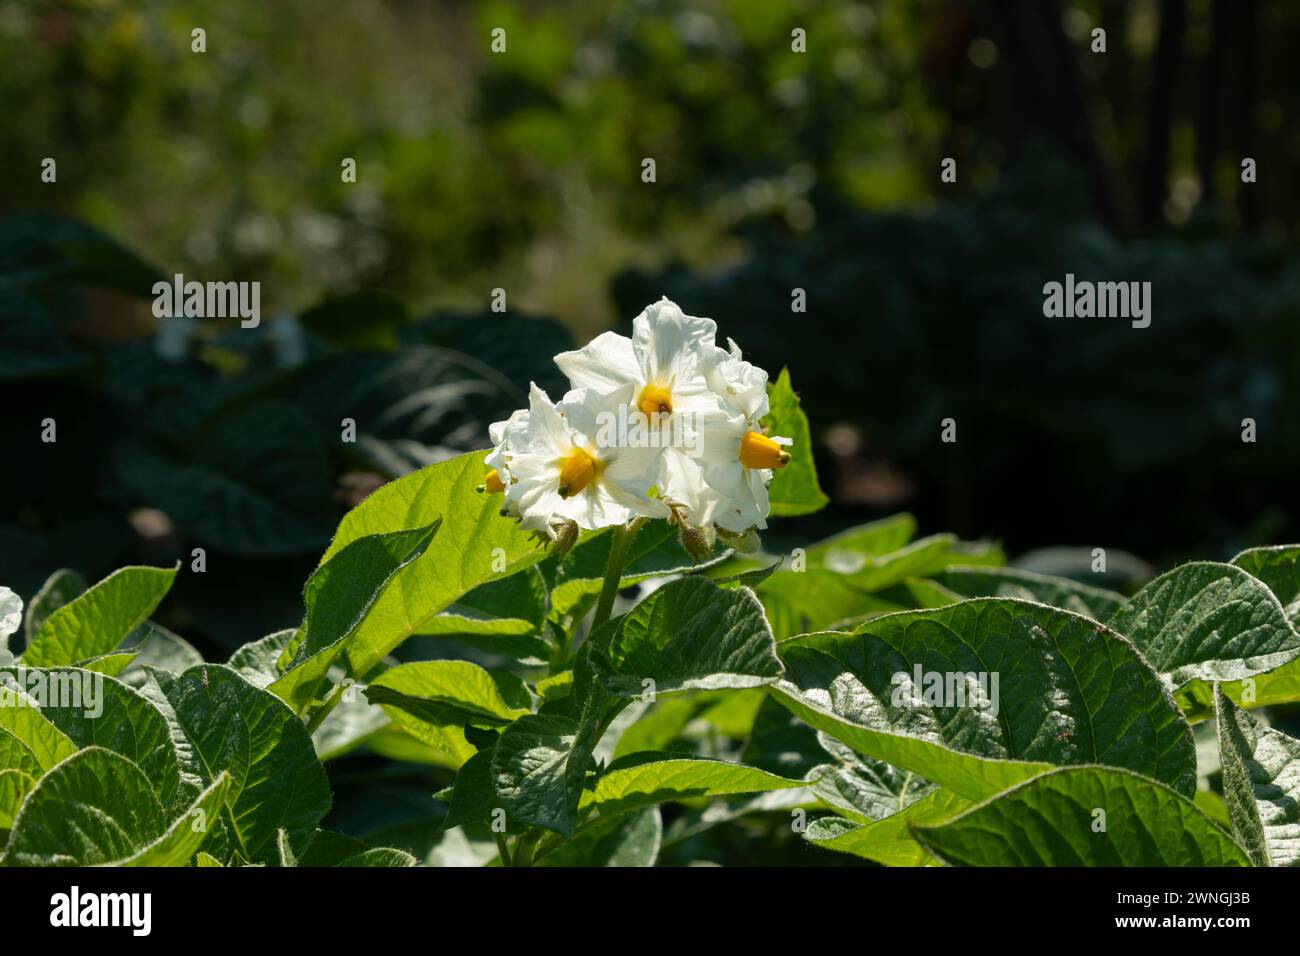 The white petals and yellow stamens of flowers of the British Queen variety of potato. Summer, England, UK Stock Photo